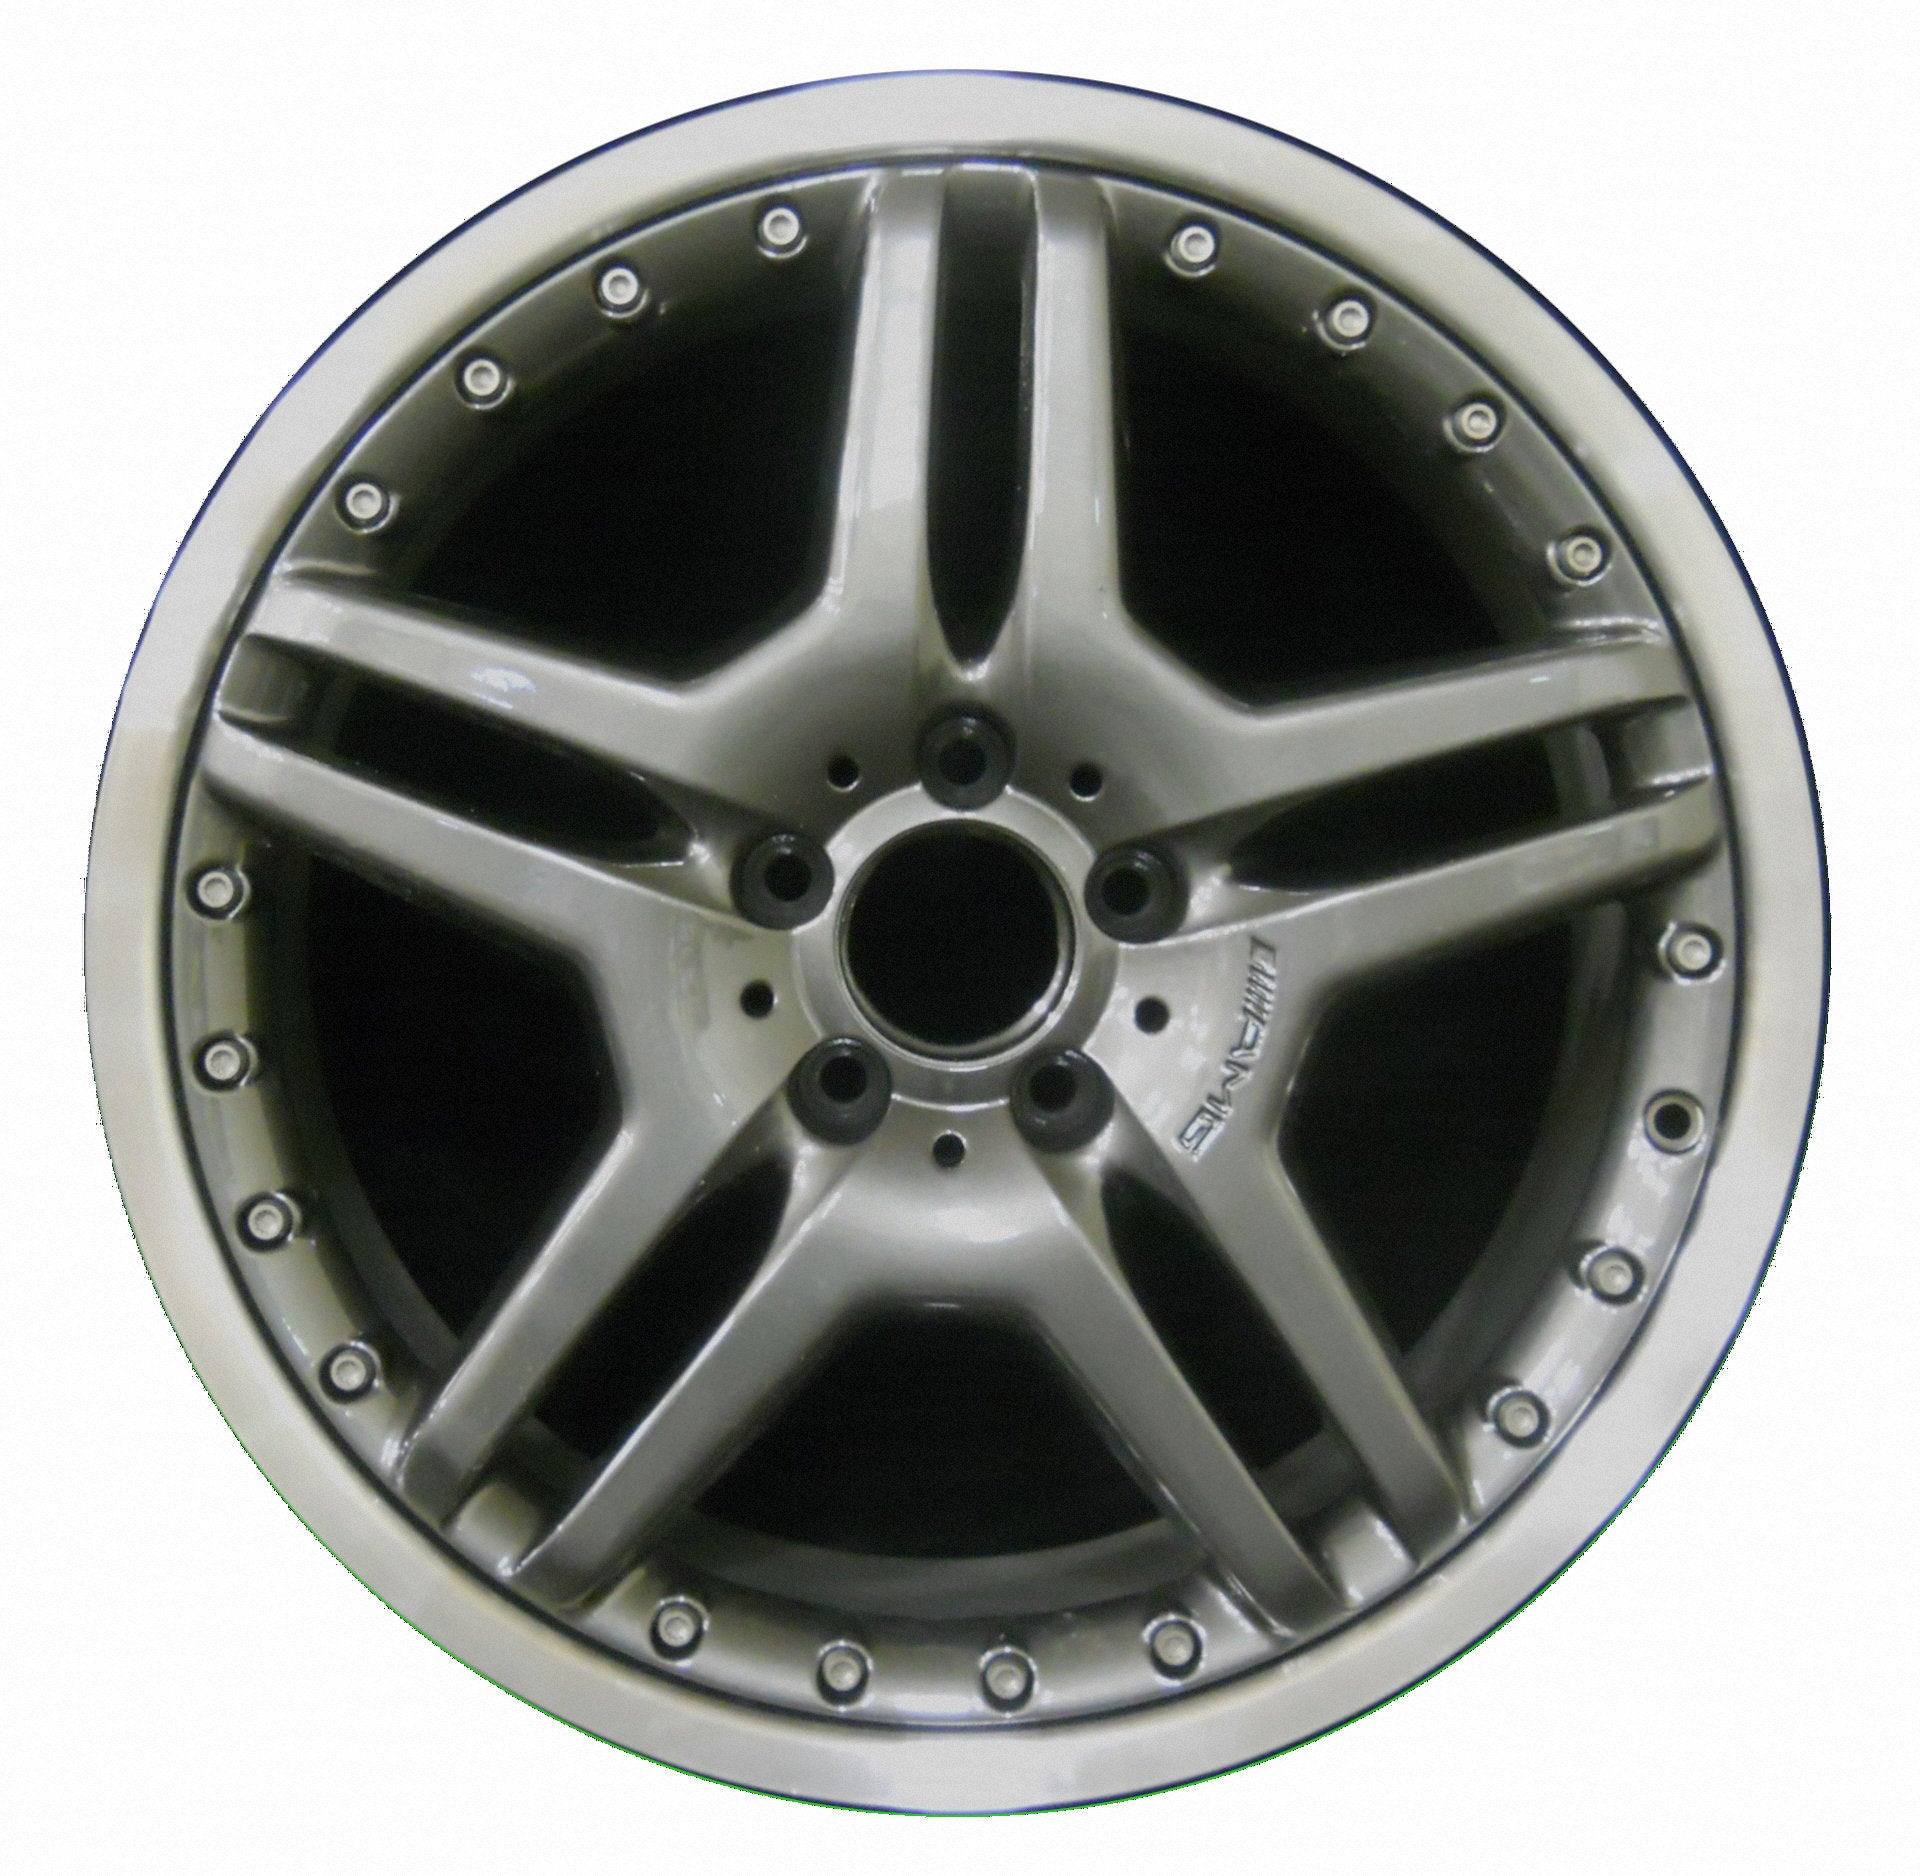 Mercedes CL-Class  2005 Factory OEM Car Wheel Size 19x9.5 Alloy WAO.65349RE.LC32.FC